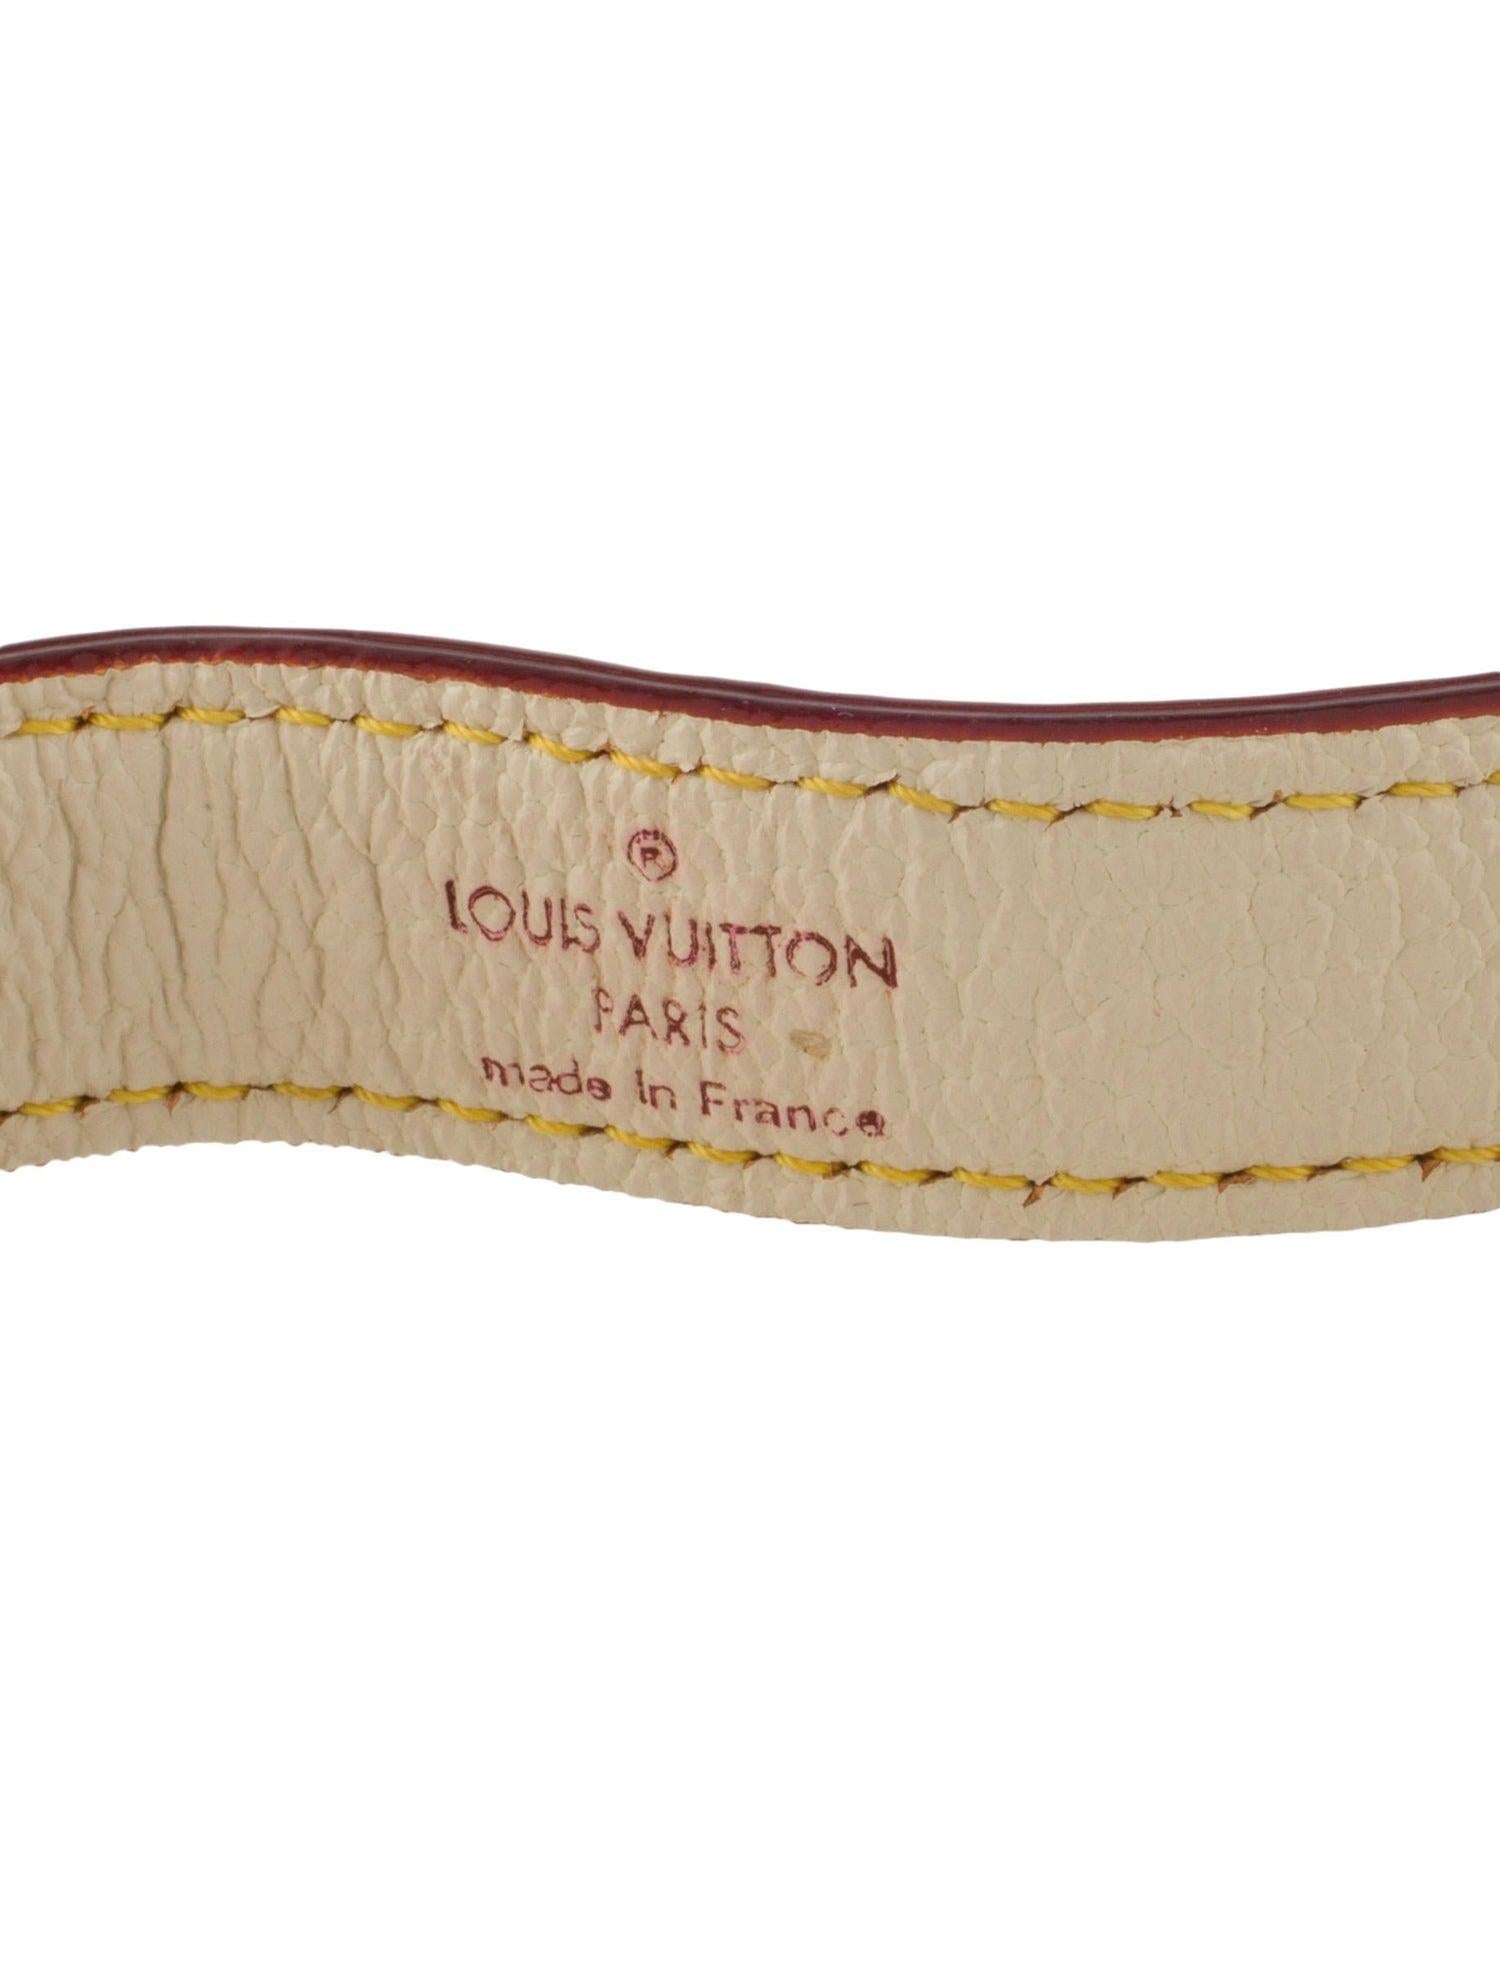 Women's or Men's Louis Vuitton Leather Cream Ivory Leather Gold Buckle Animal Pet Dog Leash 